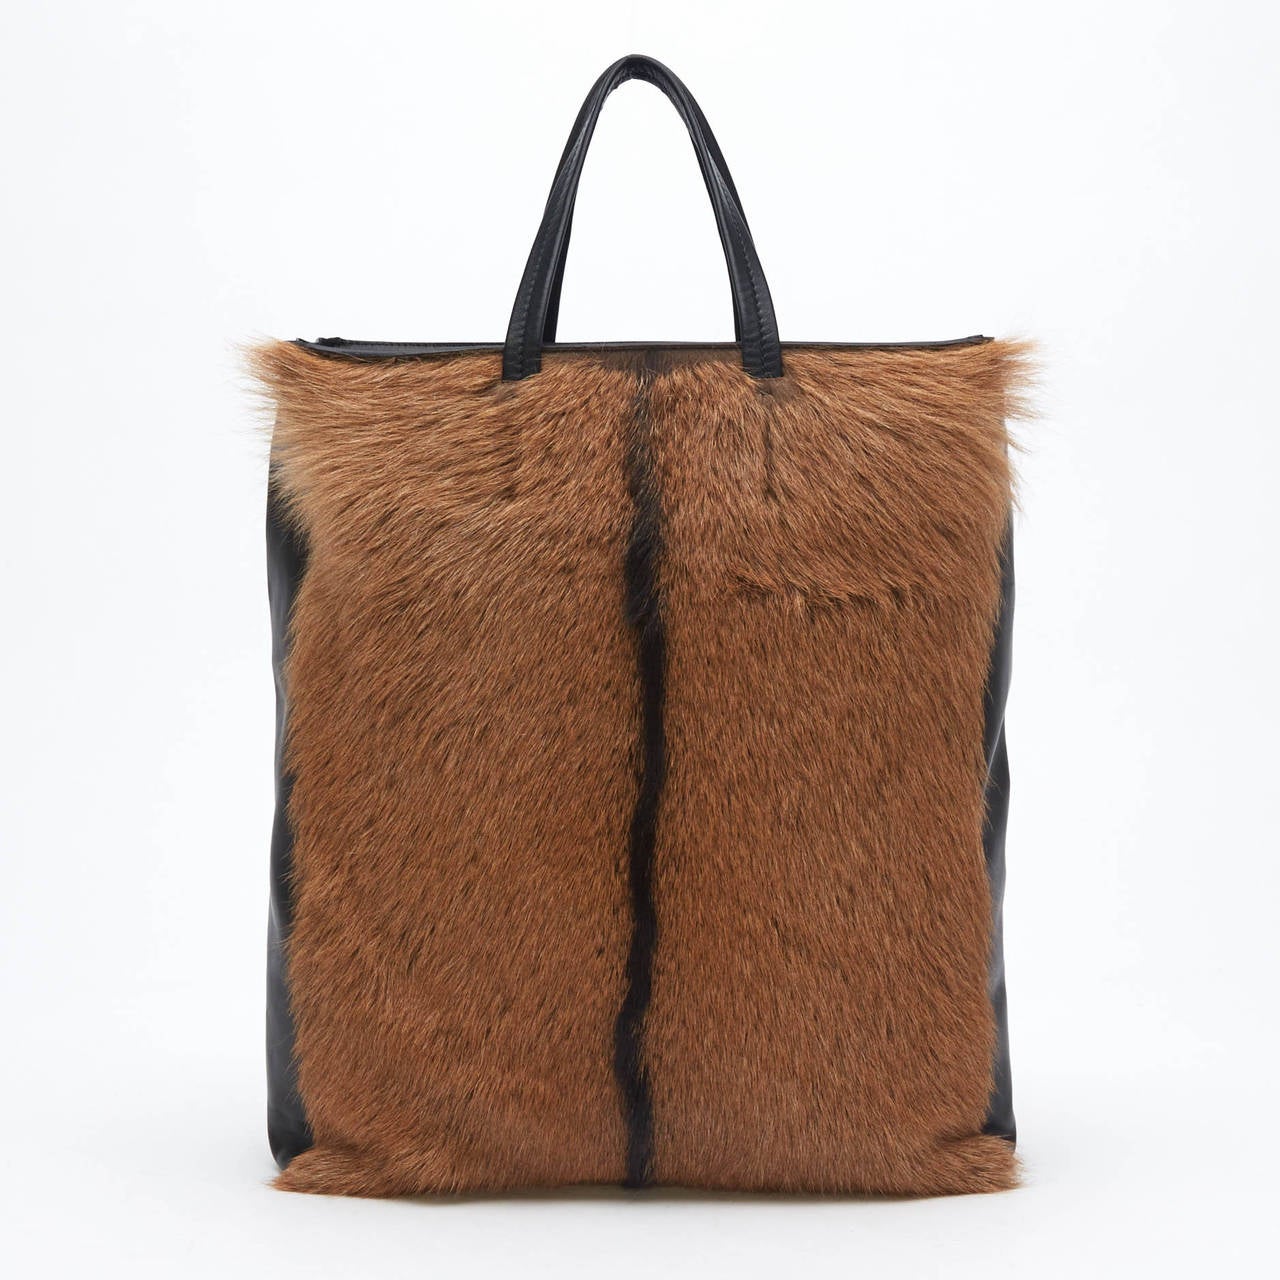 This stunning, rich Celine Cabas Fur Vertical Tote is sure to turn heads. This bag represents class and fashion. The rich soft brown and chocolate fur is paralleled with soft calfskin leather. The bag also features two leather handles and an